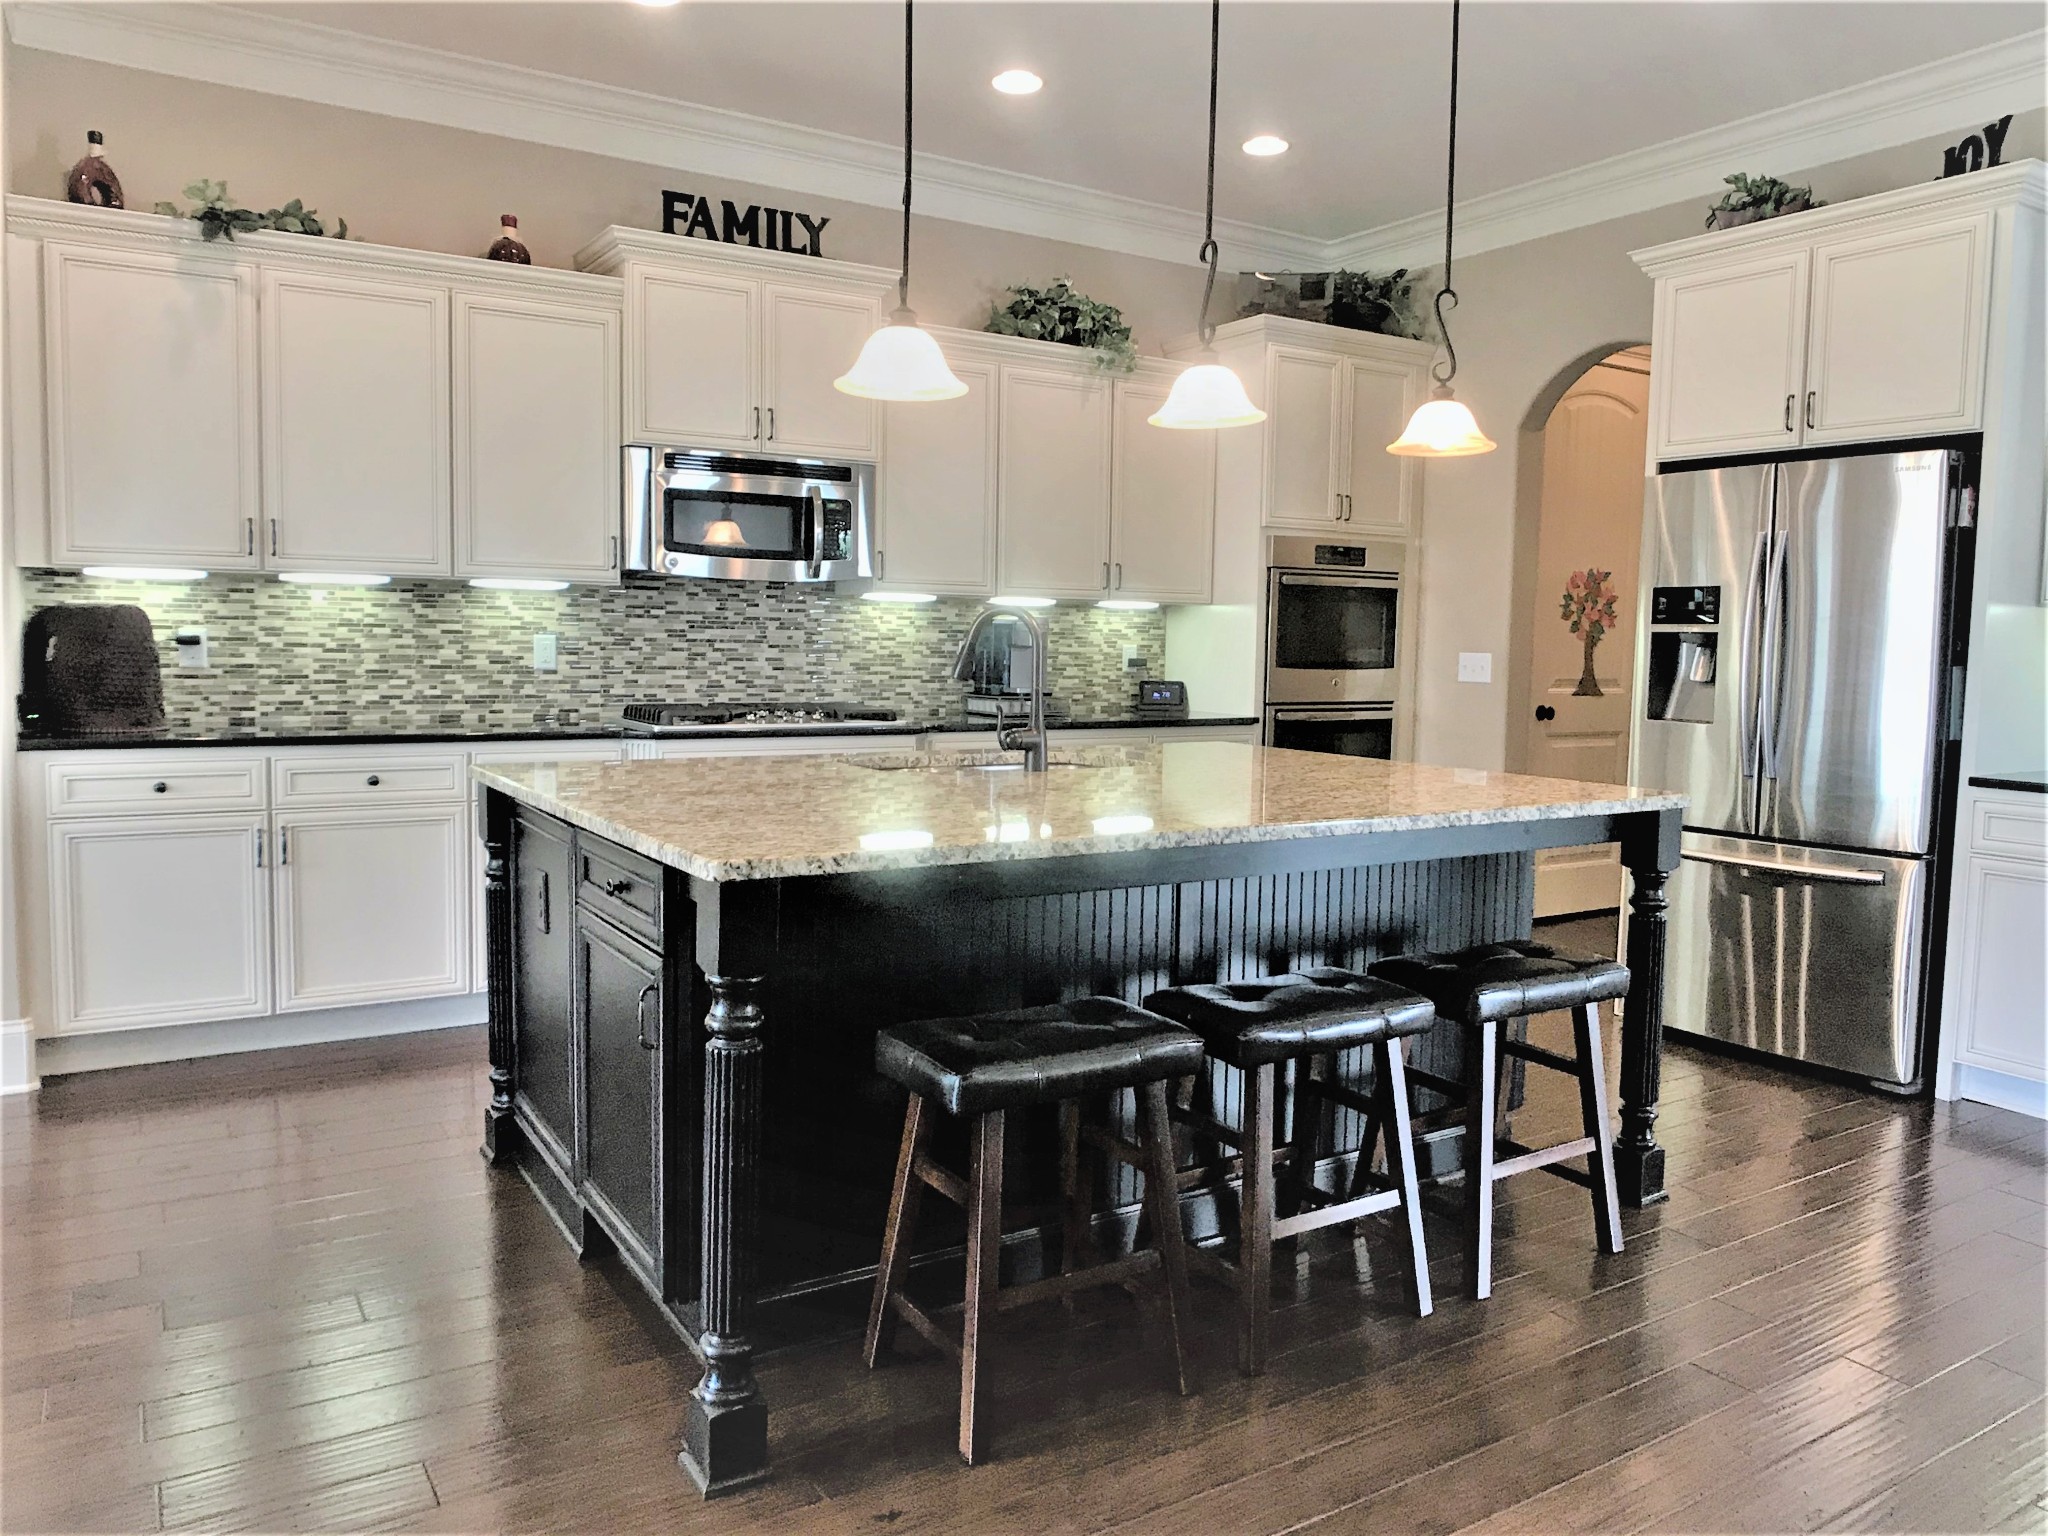 a kitchen with stainless steel appliances granite countertop a table chairs stove and microwave